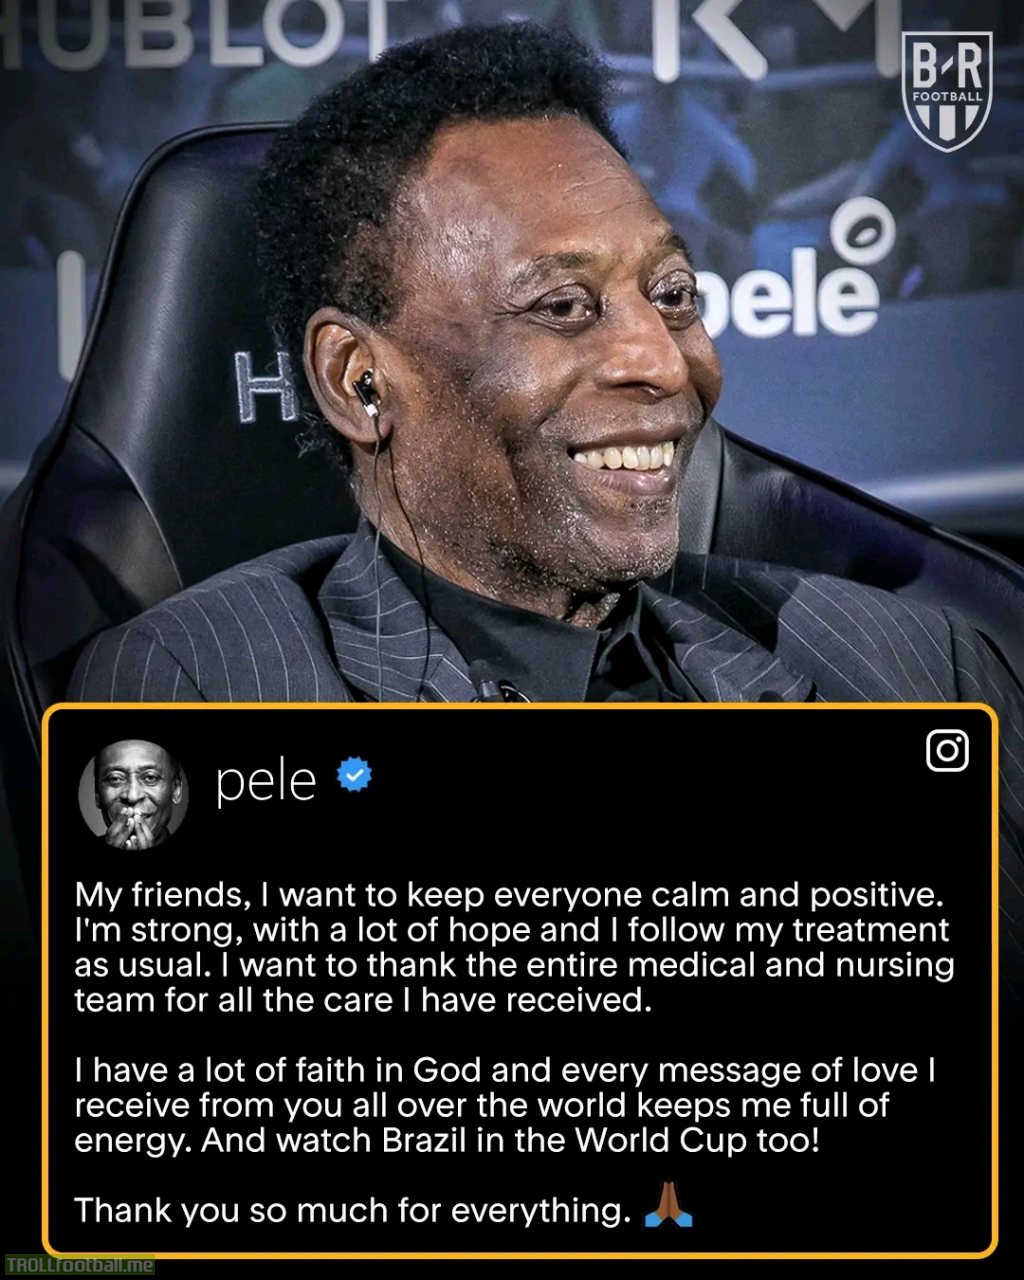 Pelé gives an update on his health.